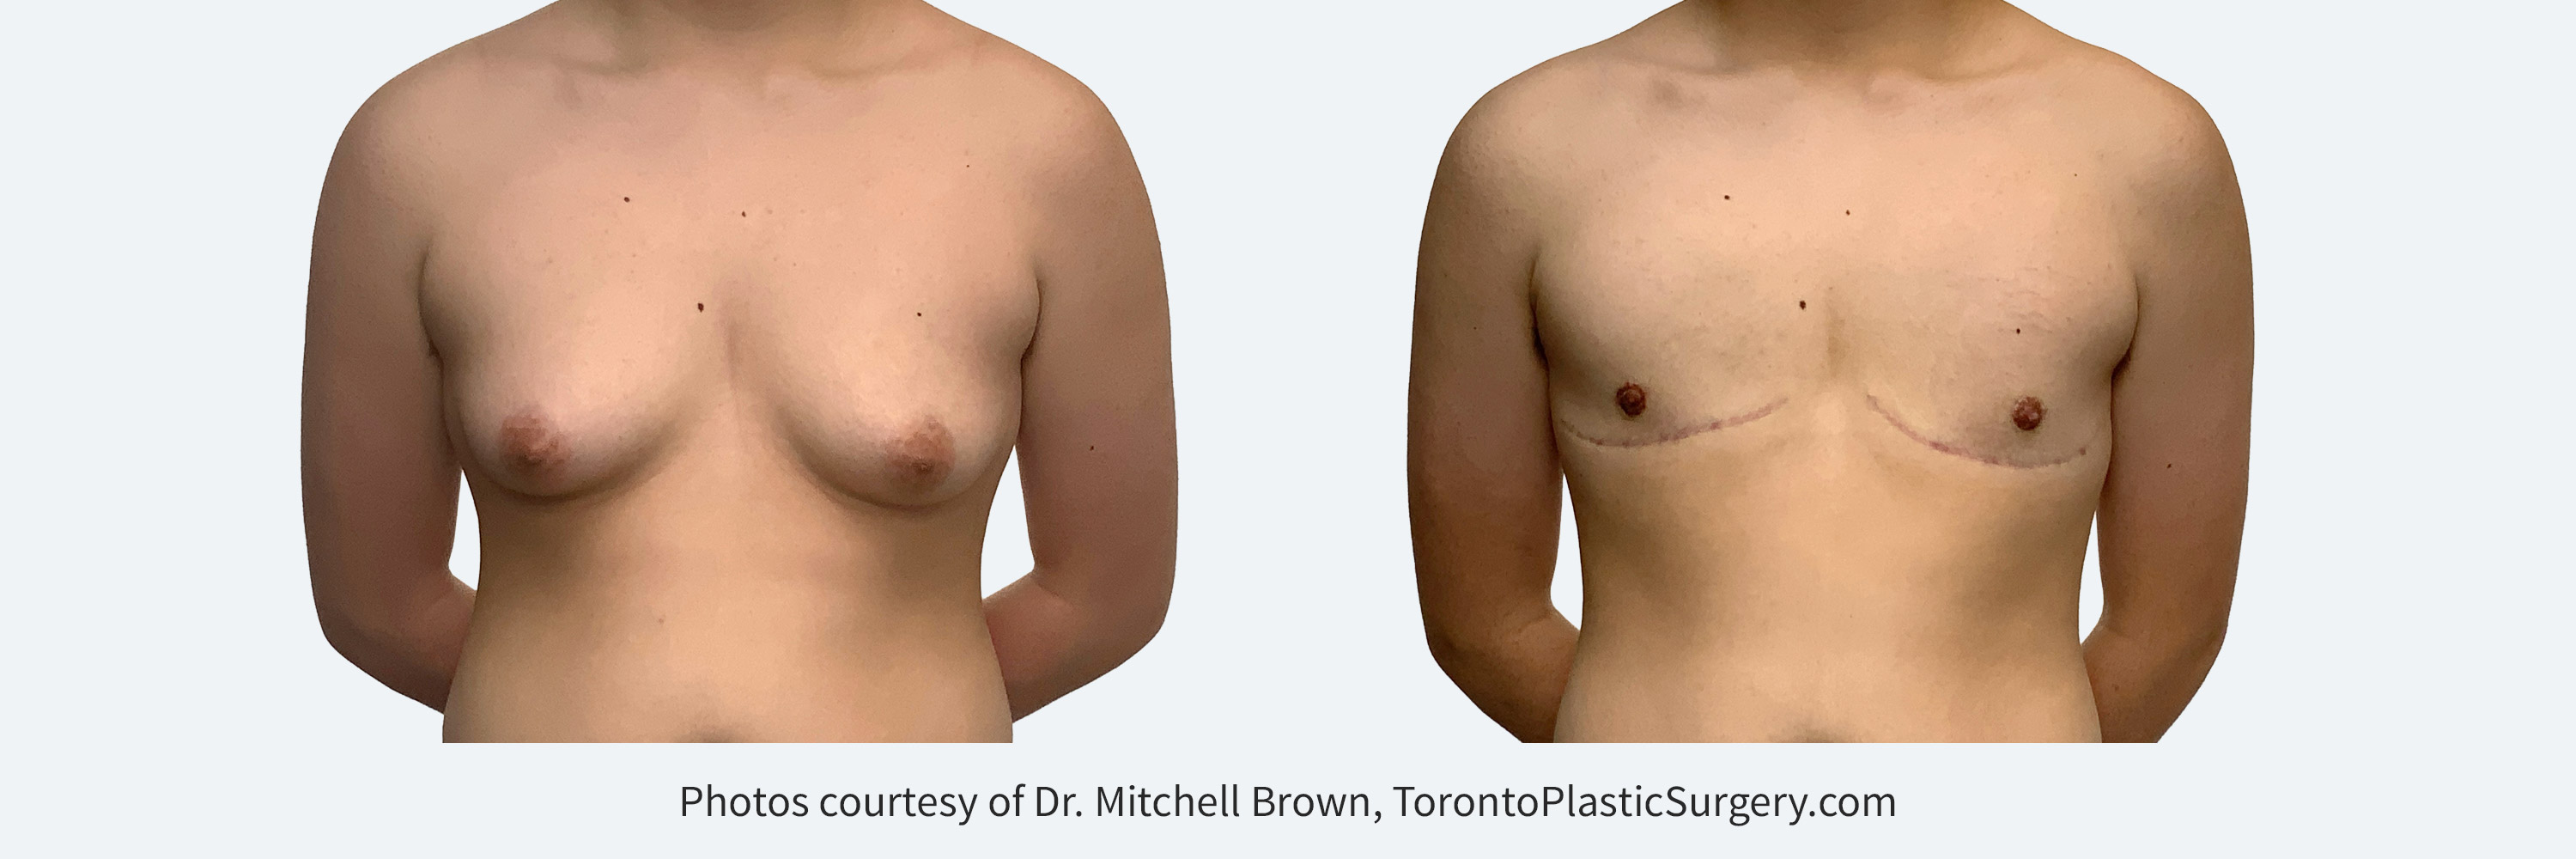 Transmale, double incision free nipple graft. Before and After 6 months. 